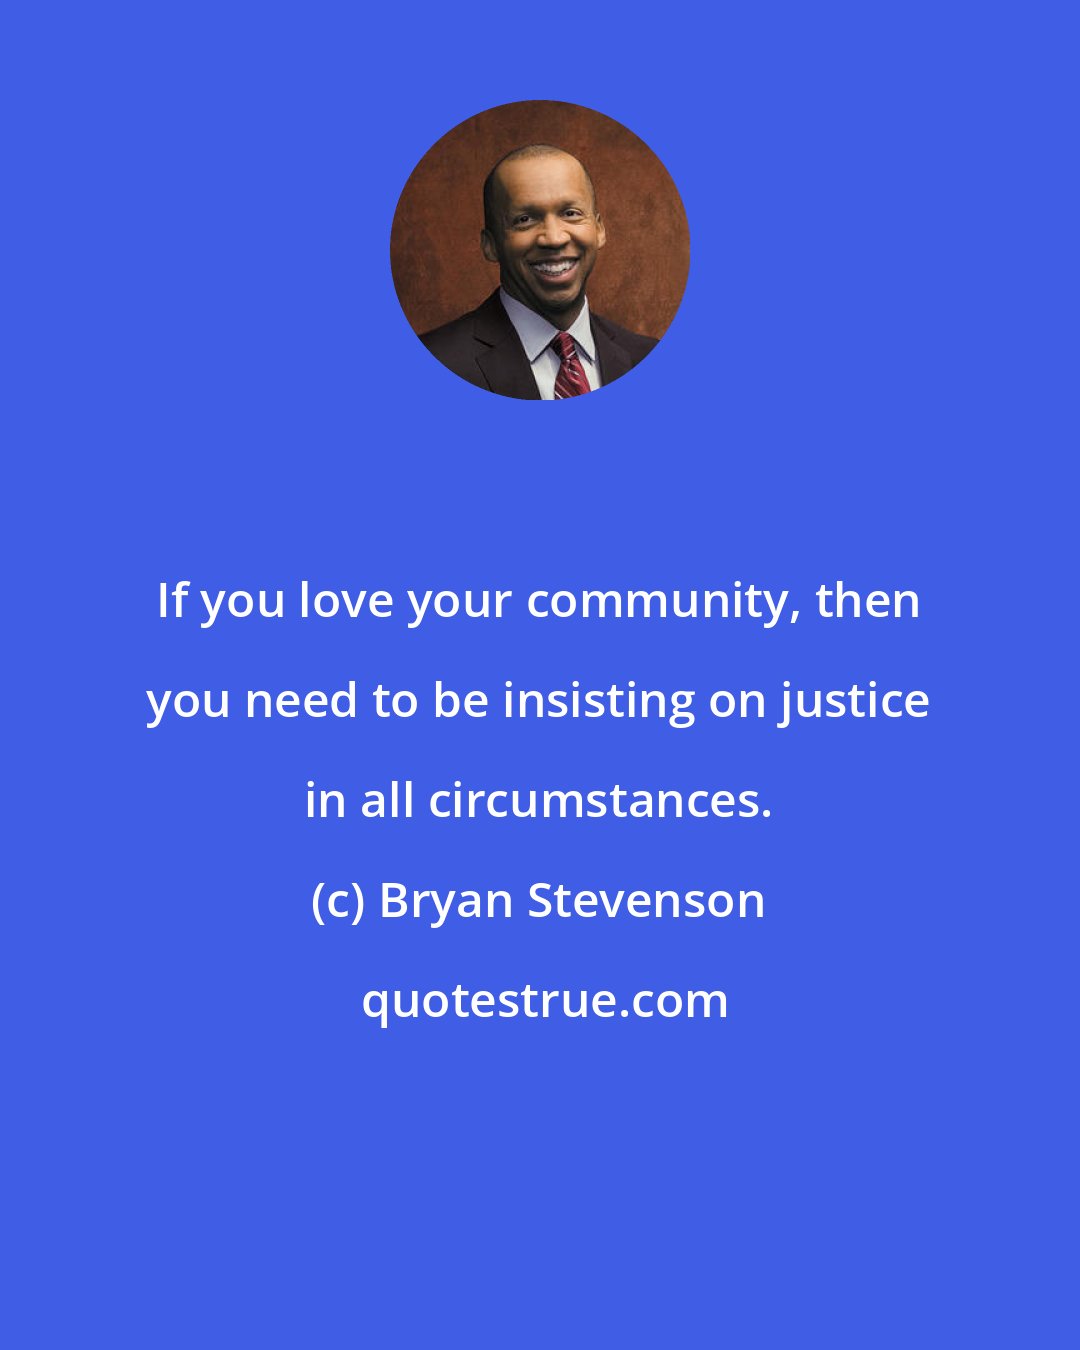 Bryan Stevenson: If you love your community, then you need to be insisting on justice in all circumstances.